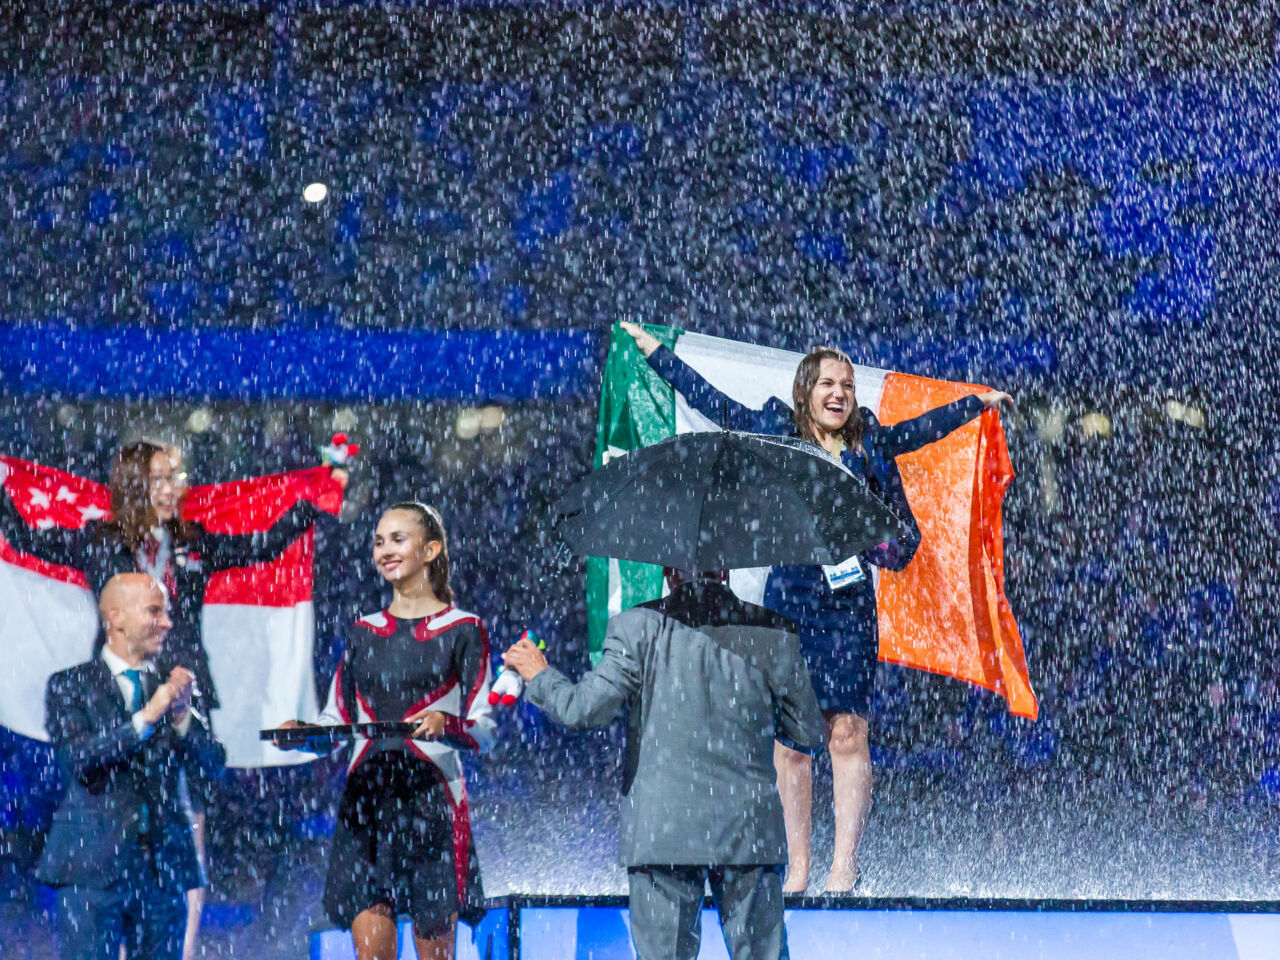 Megan Yeates celebrates on stage holding an Irish flag above her head after becoming a Freight Forwarding Champion and gold Medallist at WorldSkills Kazan 2019. 